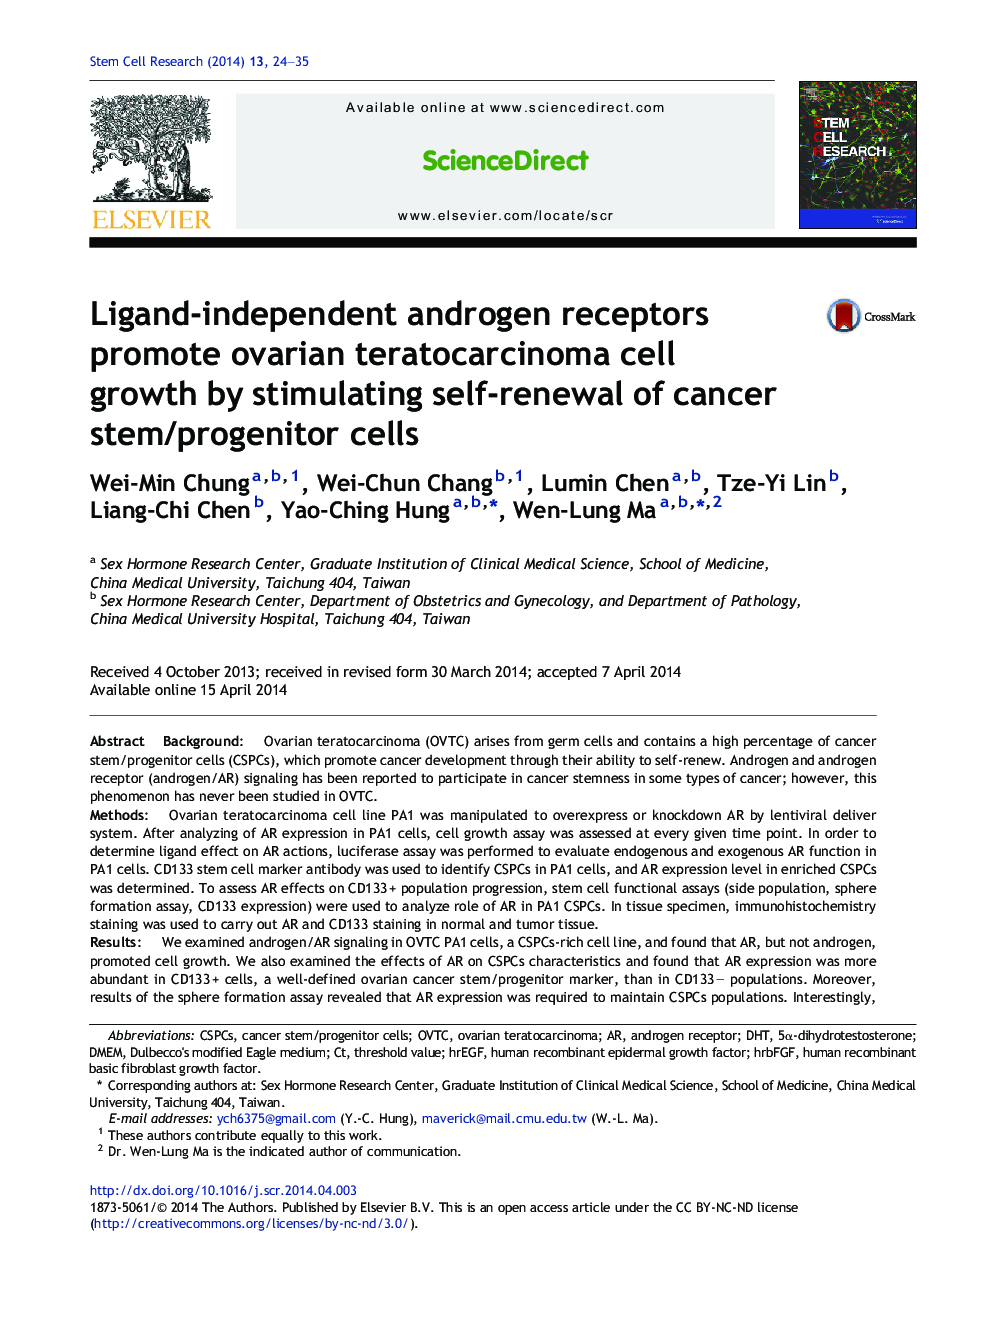 Ligand-independent androgen receptors promote ovarian teratocarcinoma cell growth by stimulating self-renewal of cancer stem/progenitor cells